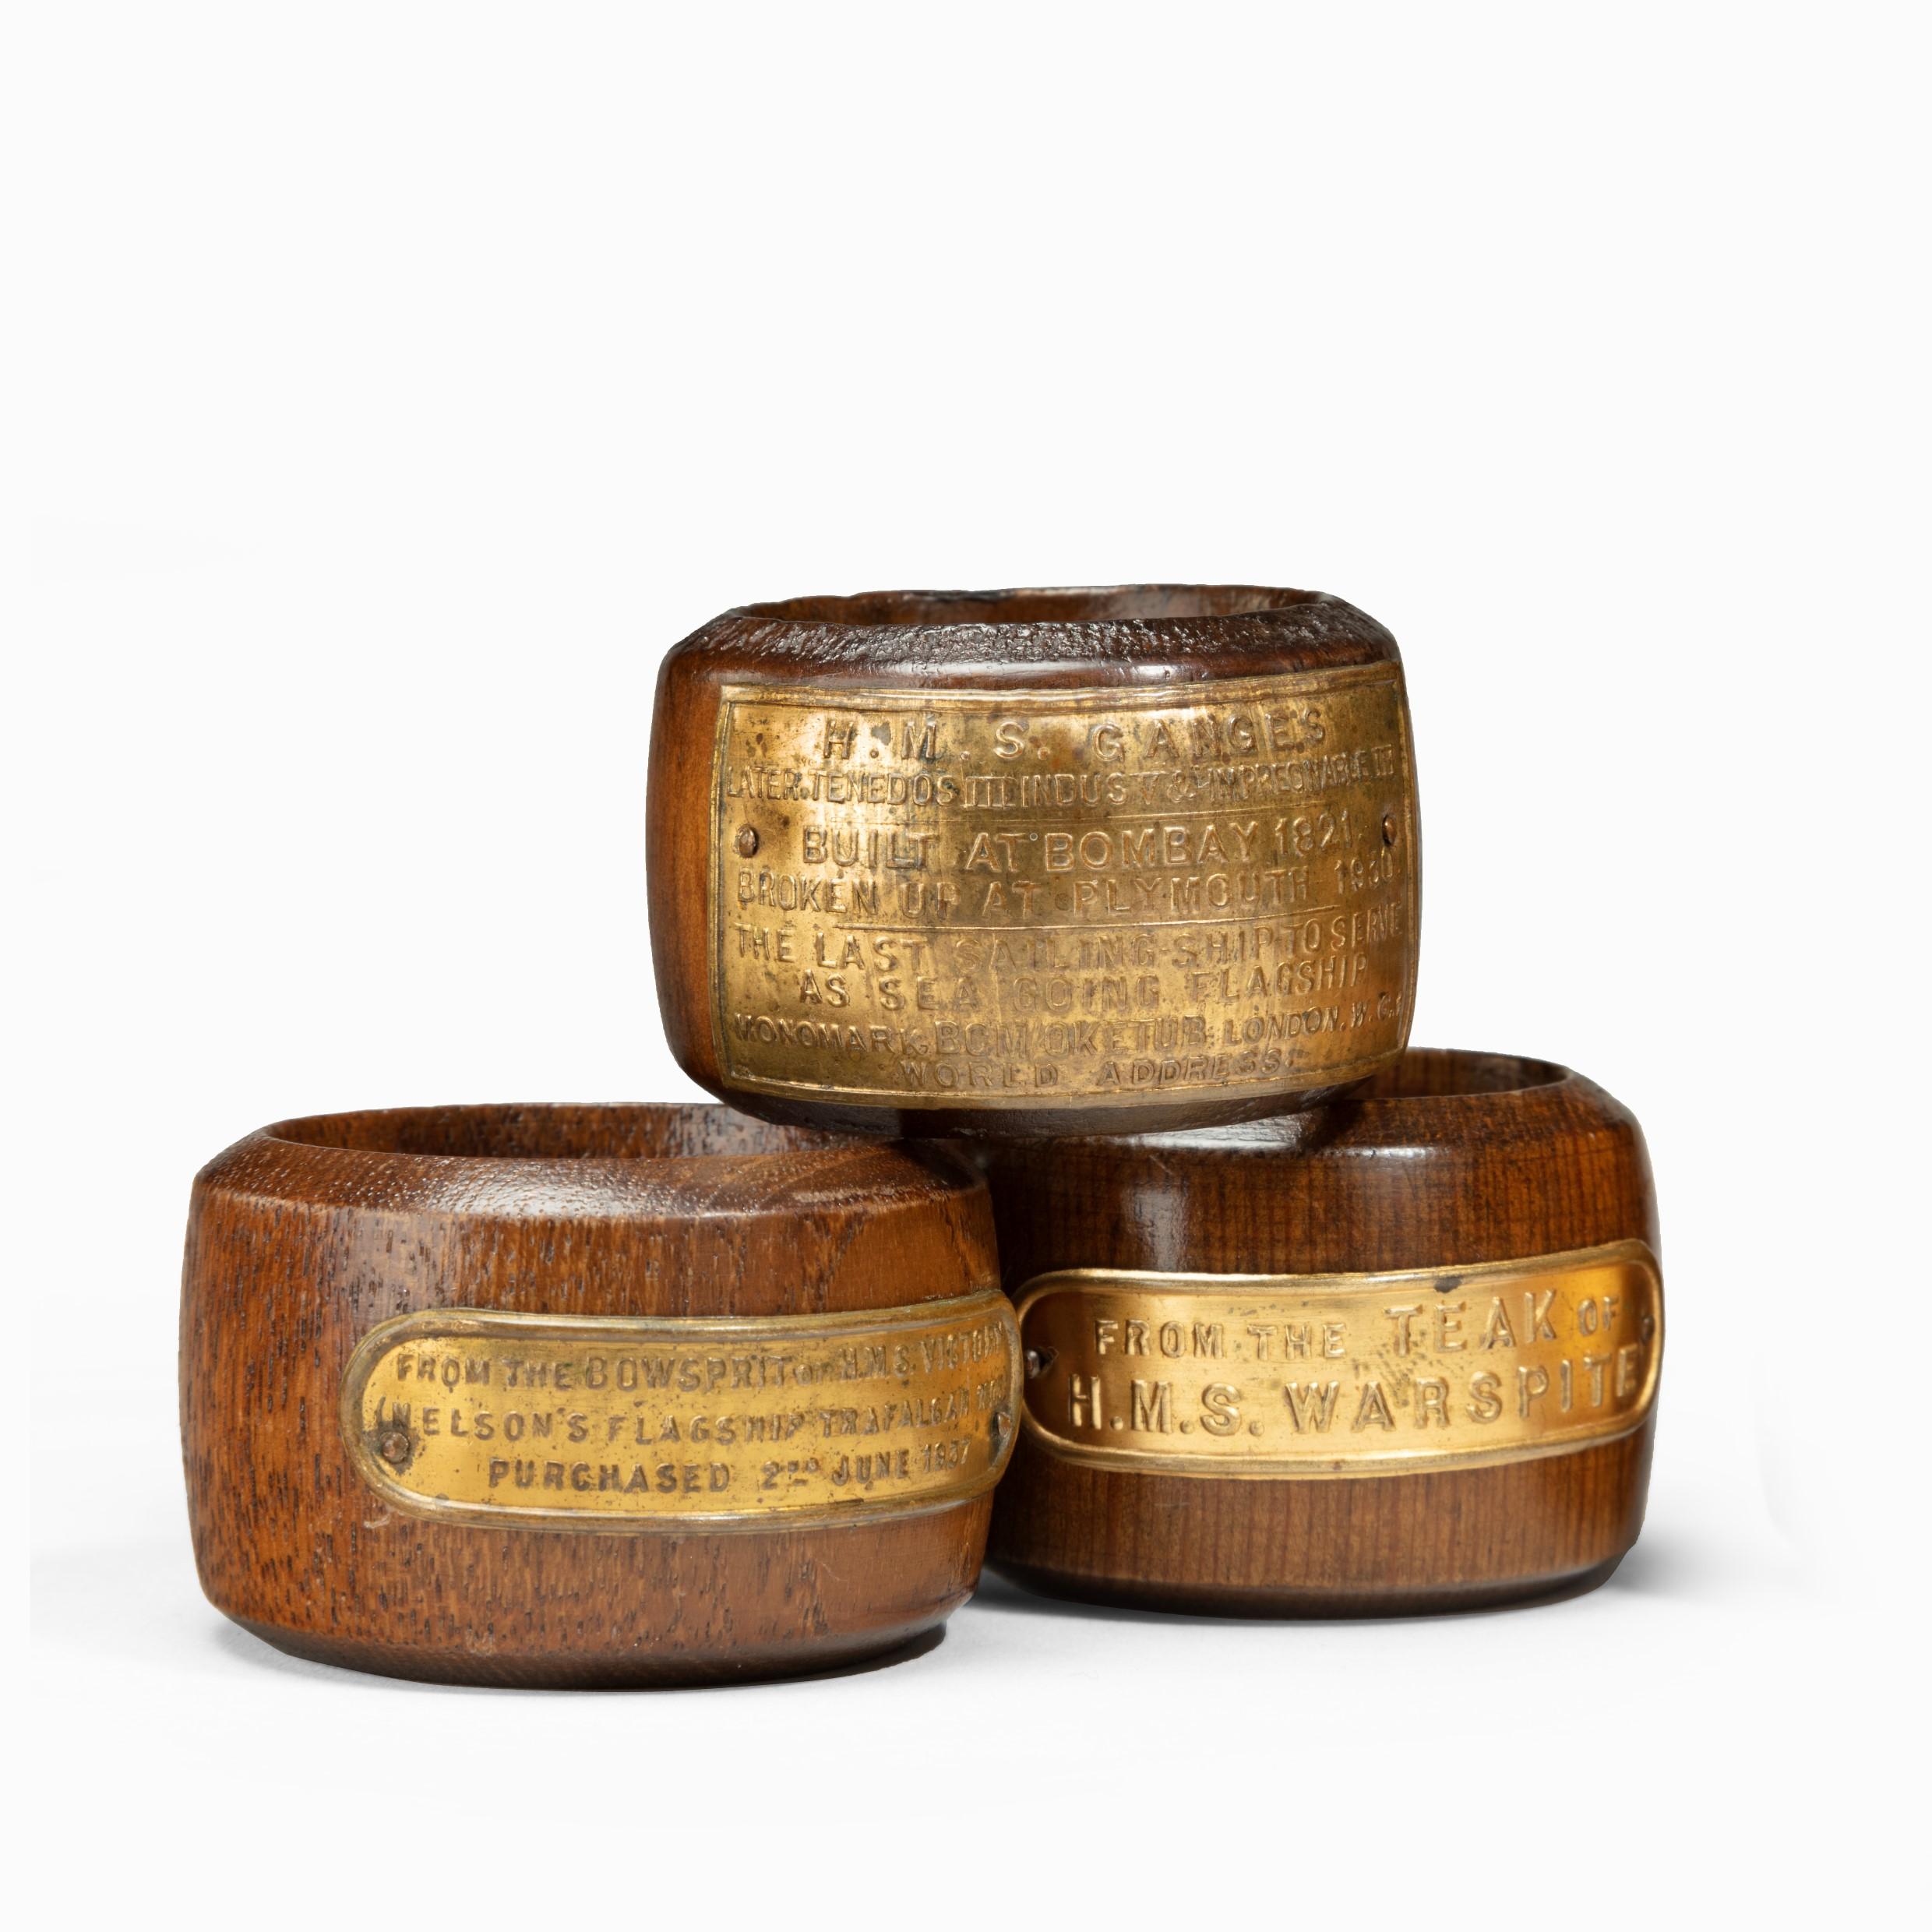 English Collection of Napkin Rings Made from Ships’ Timbers